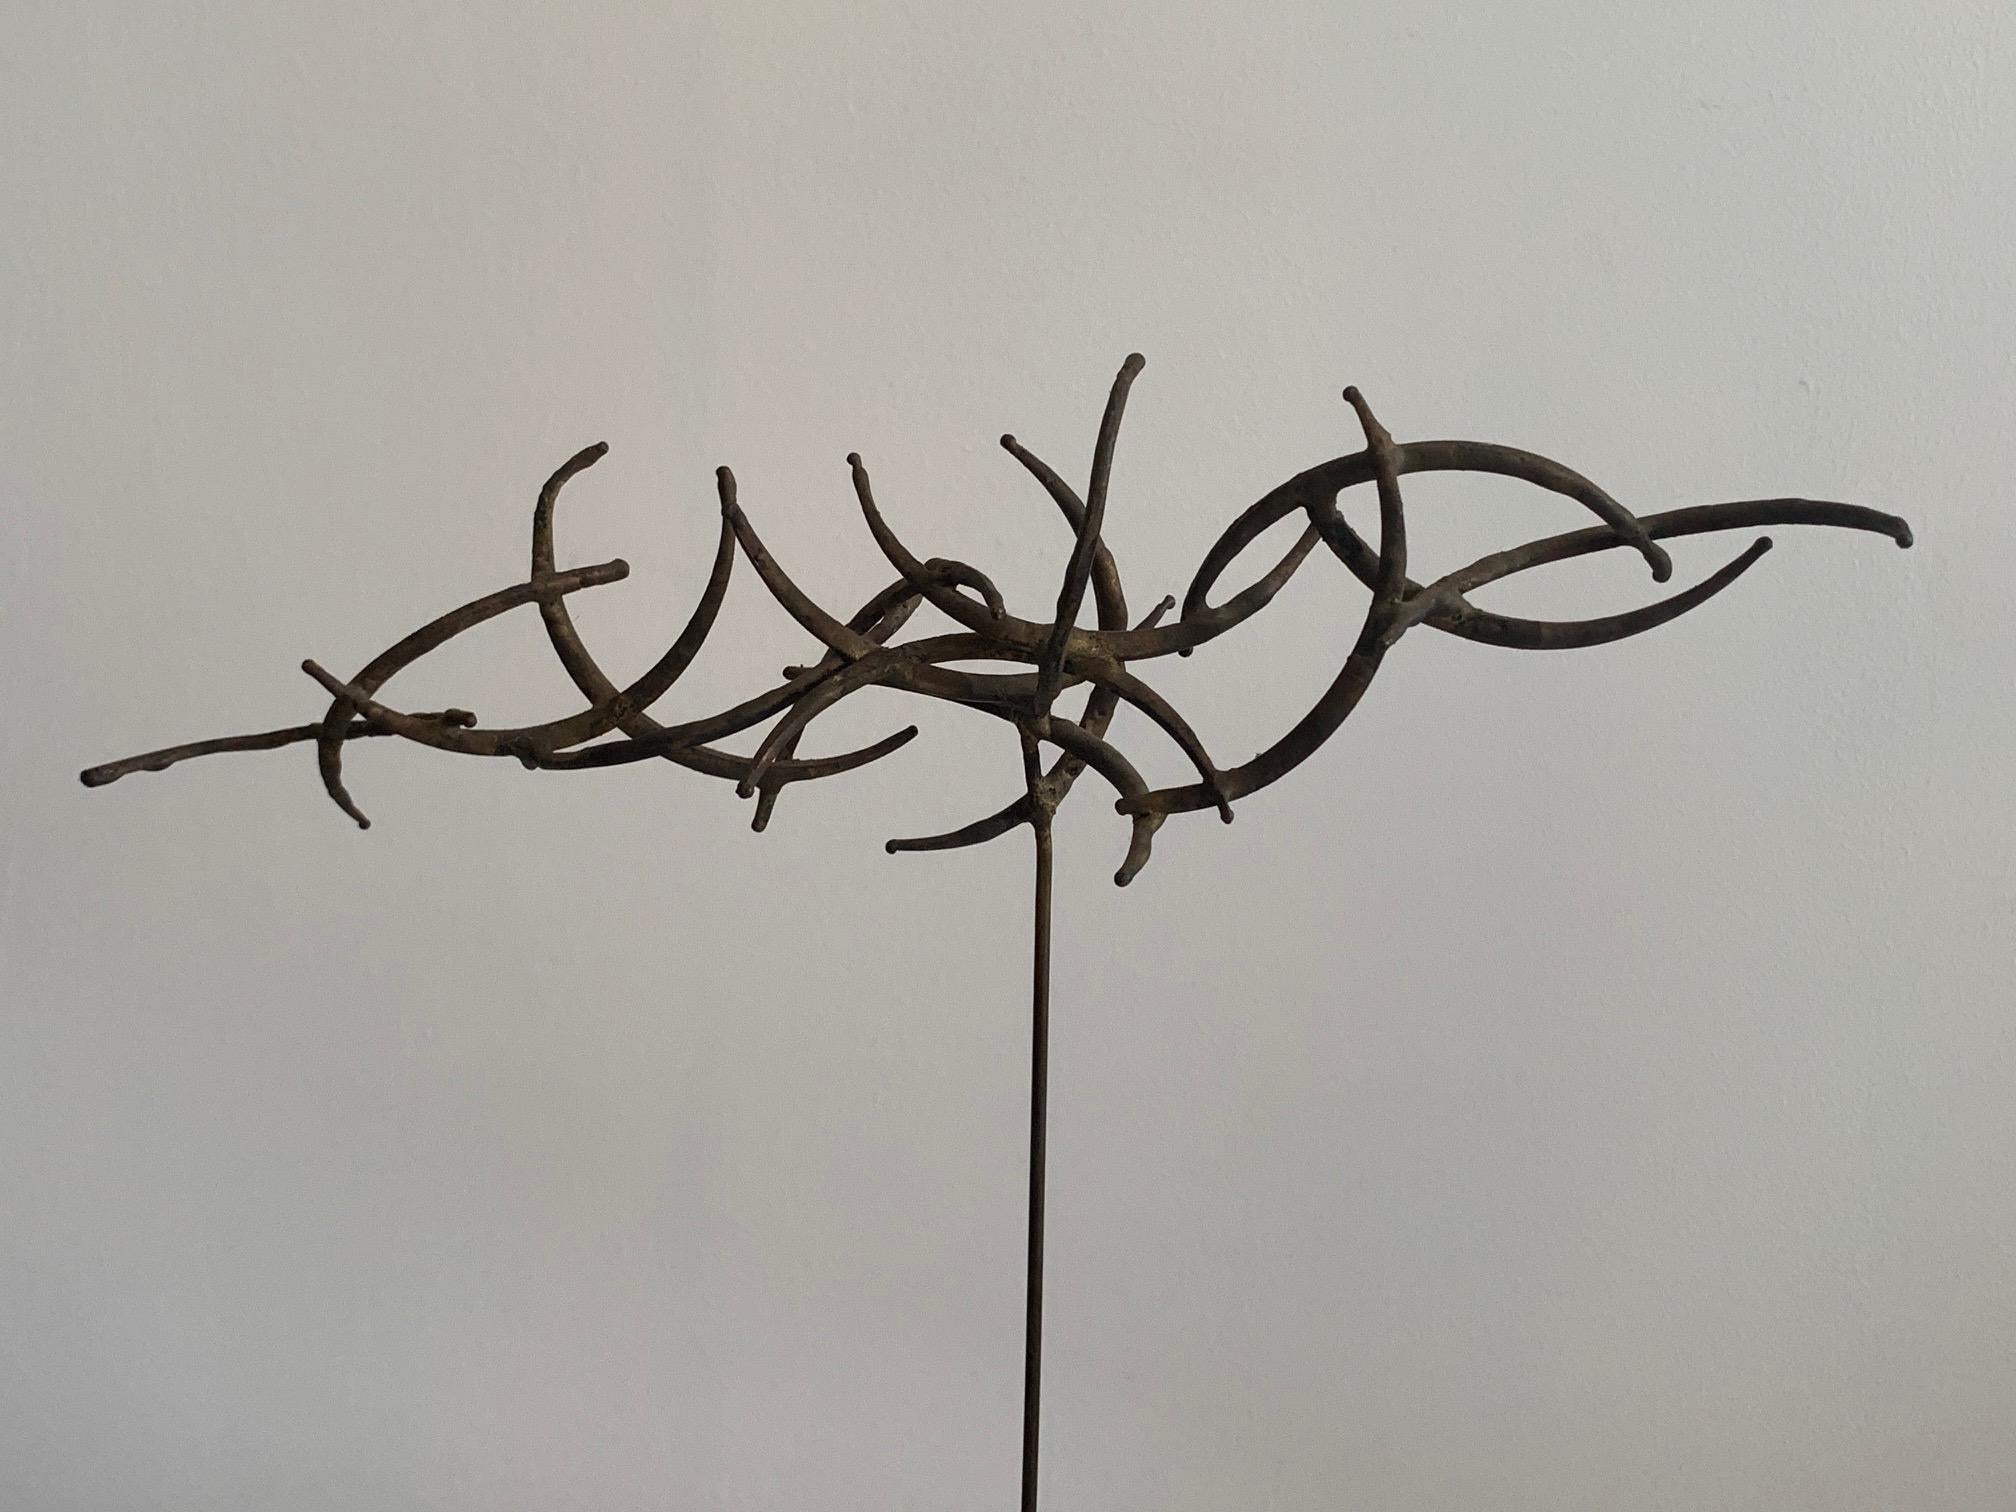 An interesting and elegant bronze sculpture, unsigned. In the style of Harry Bertoia or John Risley.